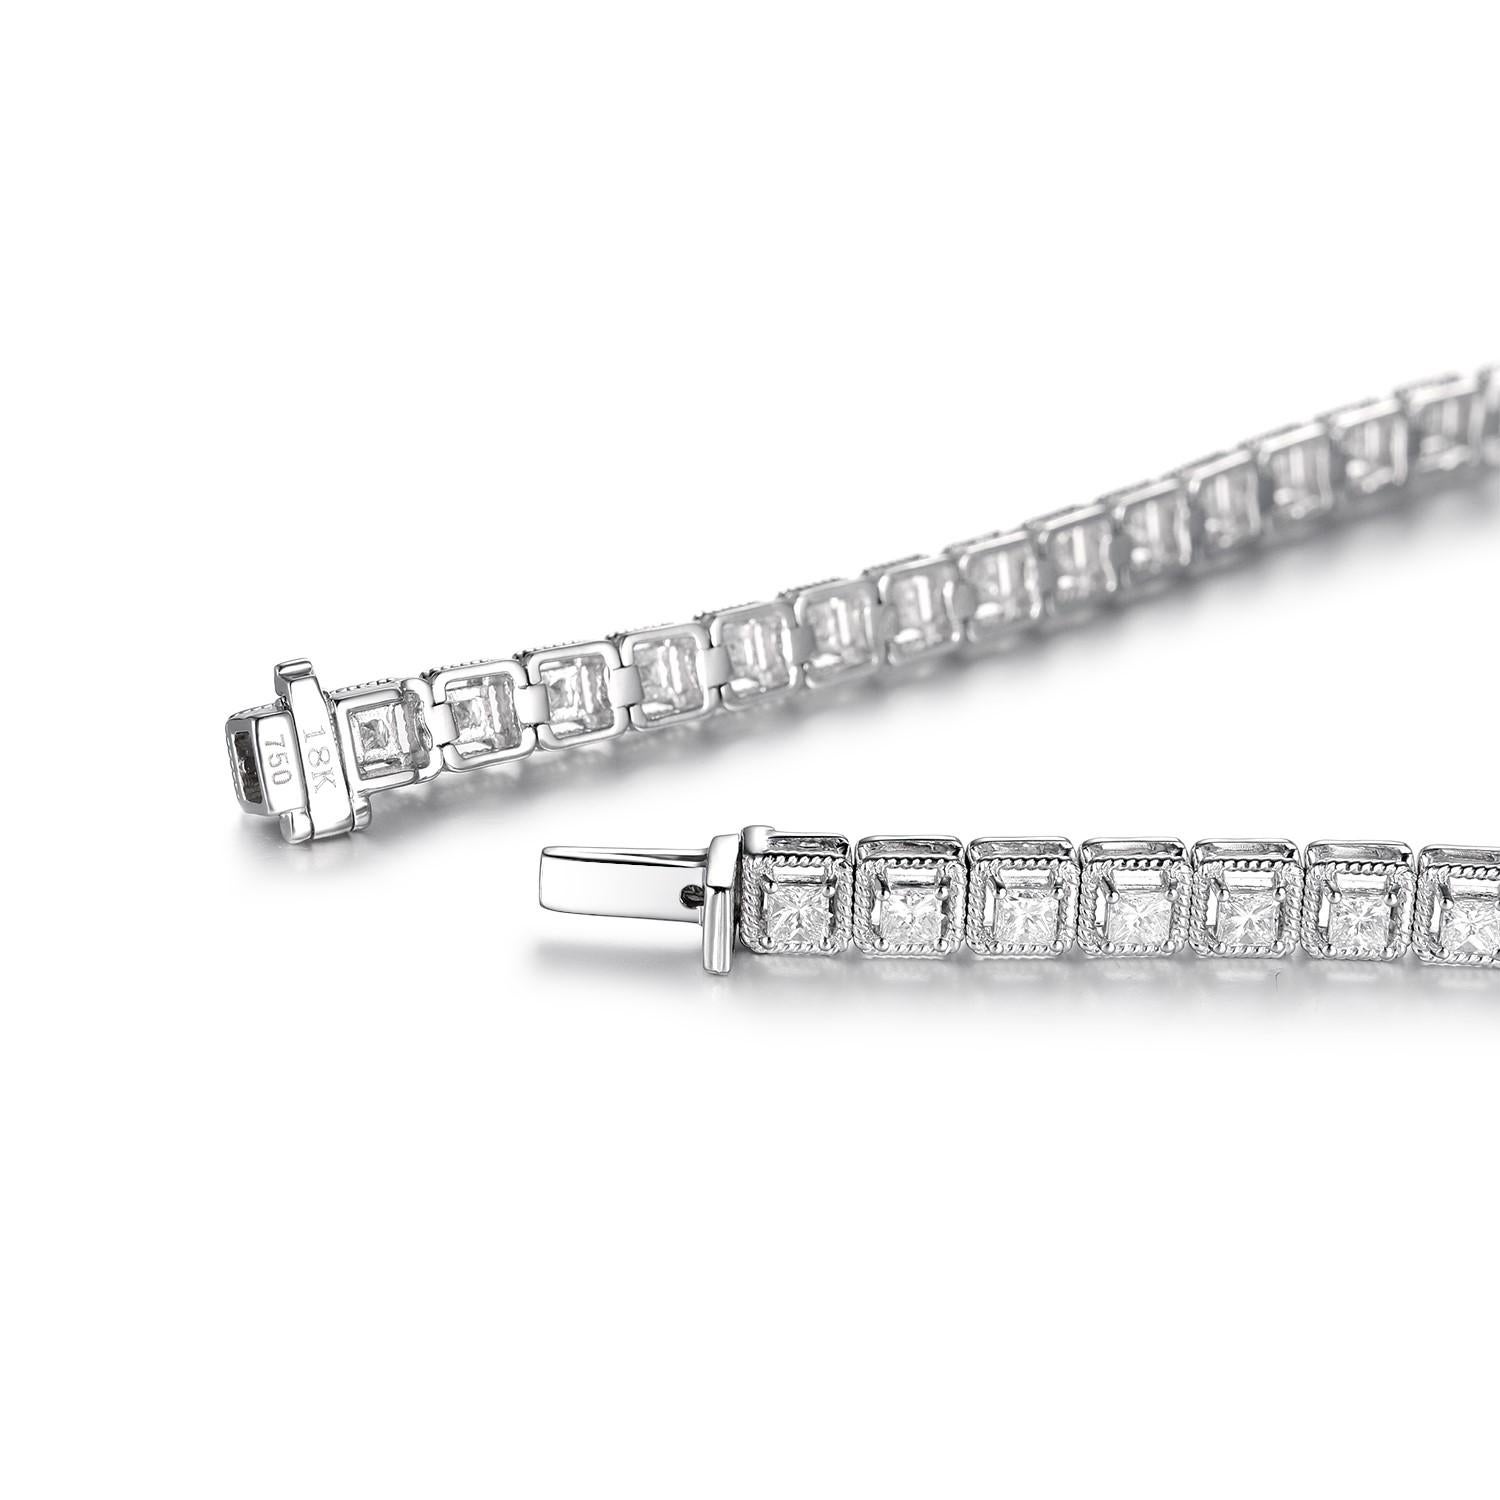 This tennis bracelet feature 2.14 carat of princess cut diamond. Diamonds are set in 18 karat gold. The edge of the bracelet is in a twisted-bead setting.

Princess Cut Diamond 2.14 carat
F-G color VS clarity